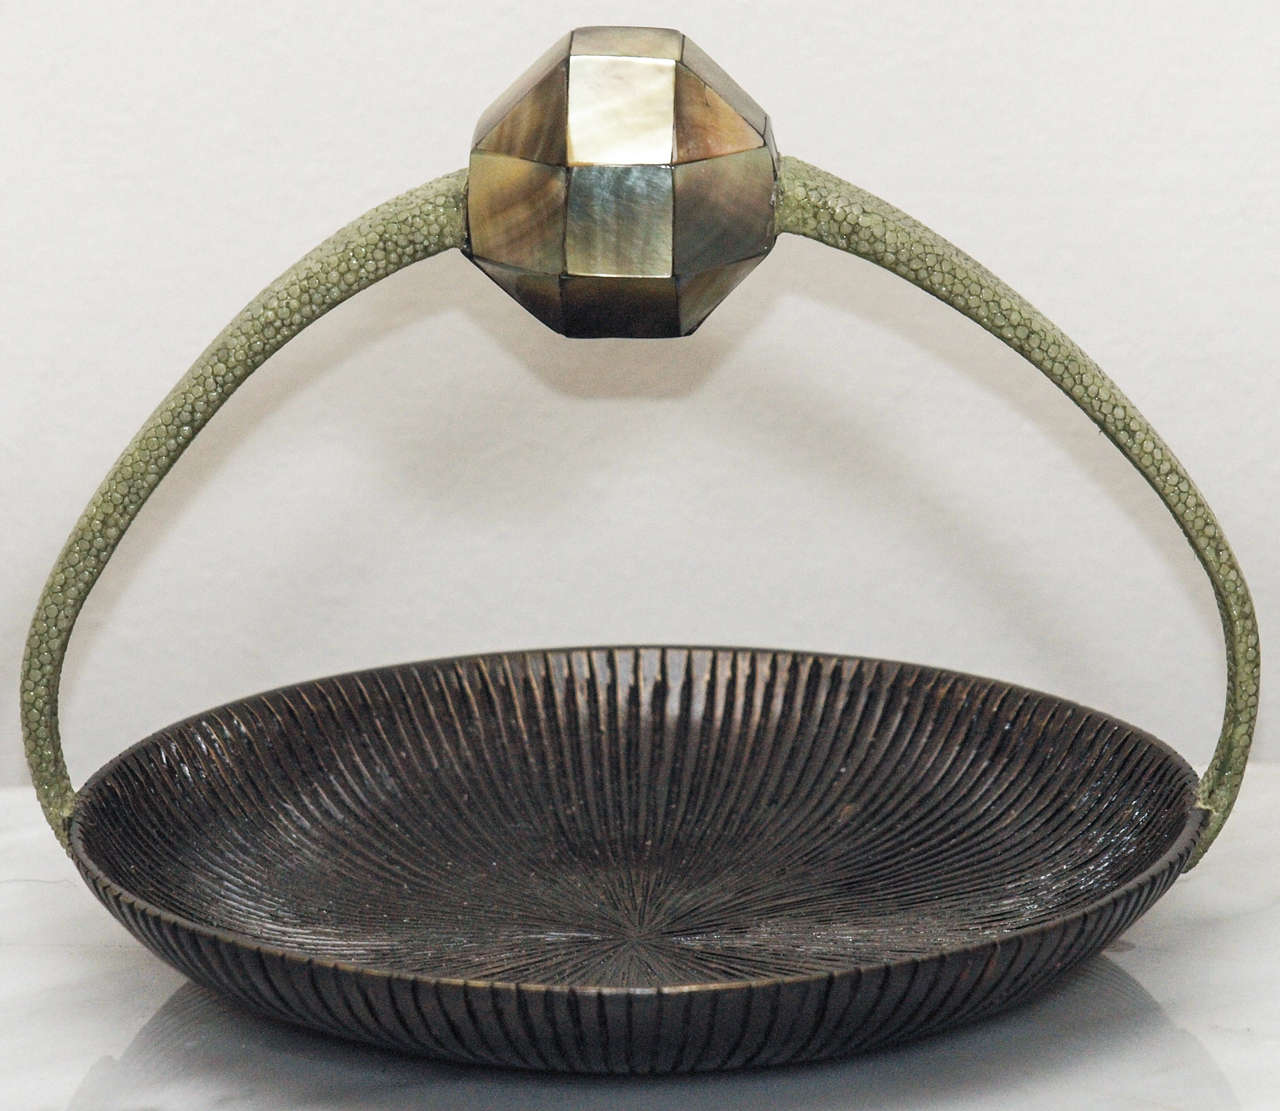 Elegant textured bronze vessel by R&Y Augousti Paris, so marked; up curving handles covered in shagreen; faceted 